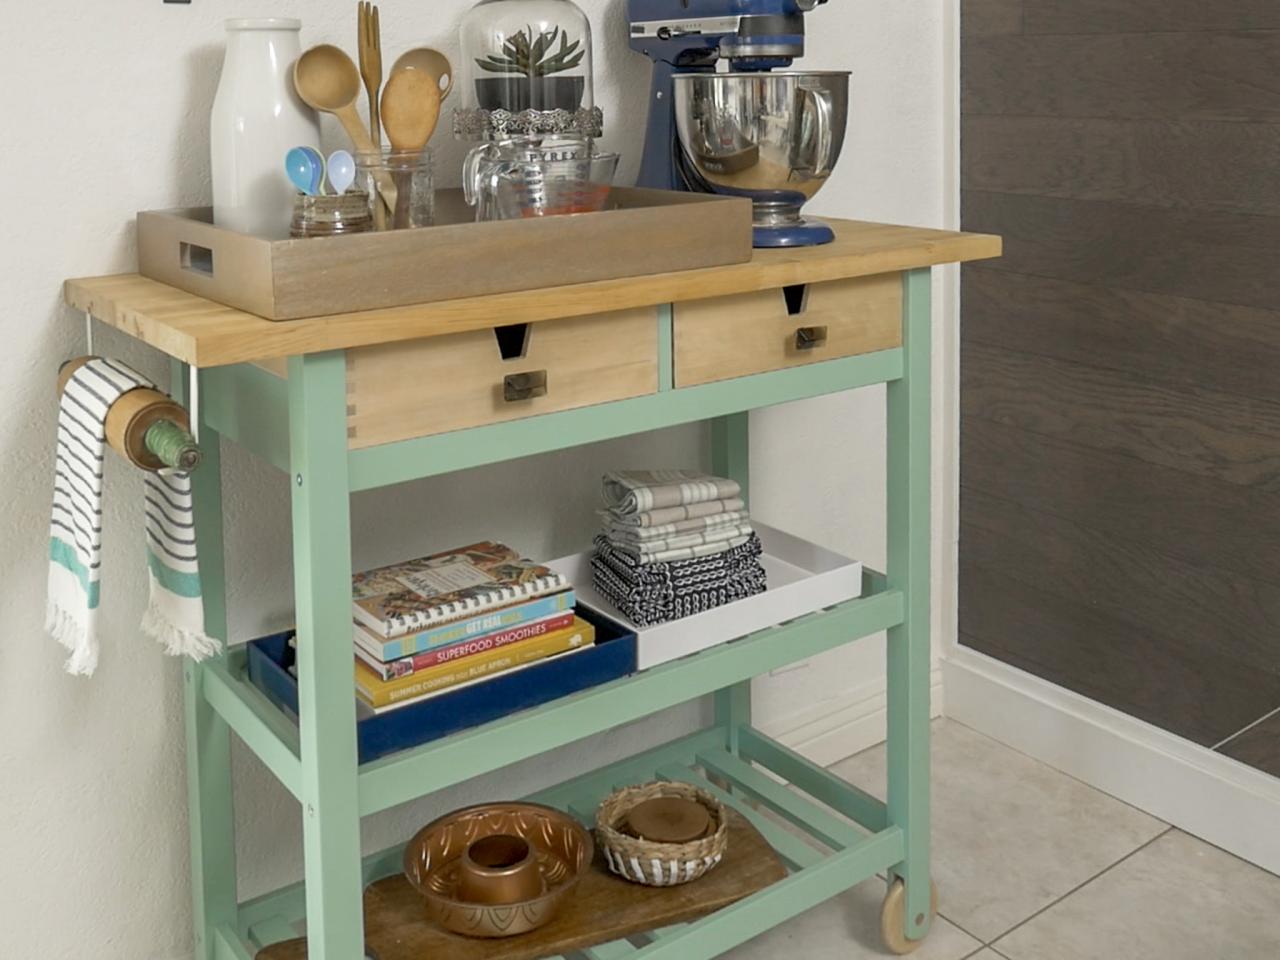 How To Trick Out A Rolling Kitchen Cart, How To Build A Kitchen Island On Wheels